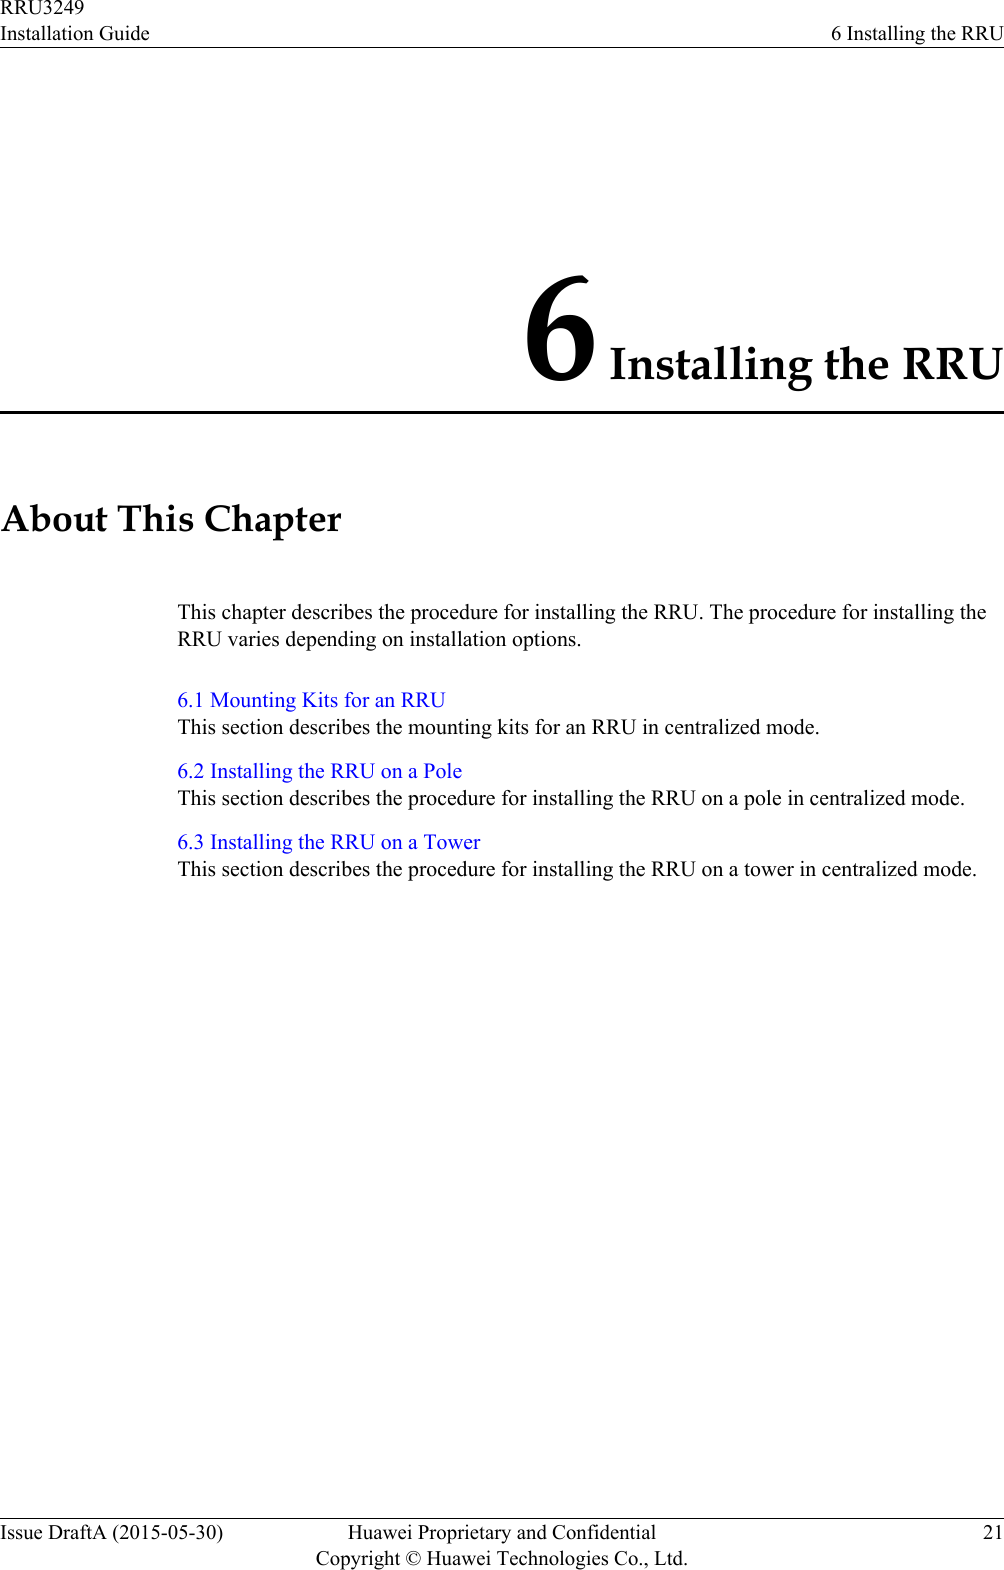 6 Installing the RRUAbout This ChapterThis chapter describes the procedure for installing the RRU. The procedure for installing theRRU varies depending on installation options.6.1 Mounting Kits for an RRUThis section describes the mounting kits for an RRU in centralized mode.6.2 Installing the RRU on a PoleThis section describes the procedure for installing the RRU on a pole in centralized mode.6.3 Installing the RRU on a TowerThis section describes the procedure for installing the RRU on a tower in centralized mode.RRU3249Installation Guide 6 Installing the RRUIssue DraftA (2015-05-30) Huawei Proprietary and ConfidentialCopyright © Huawei Technologies Co., Ltd.21